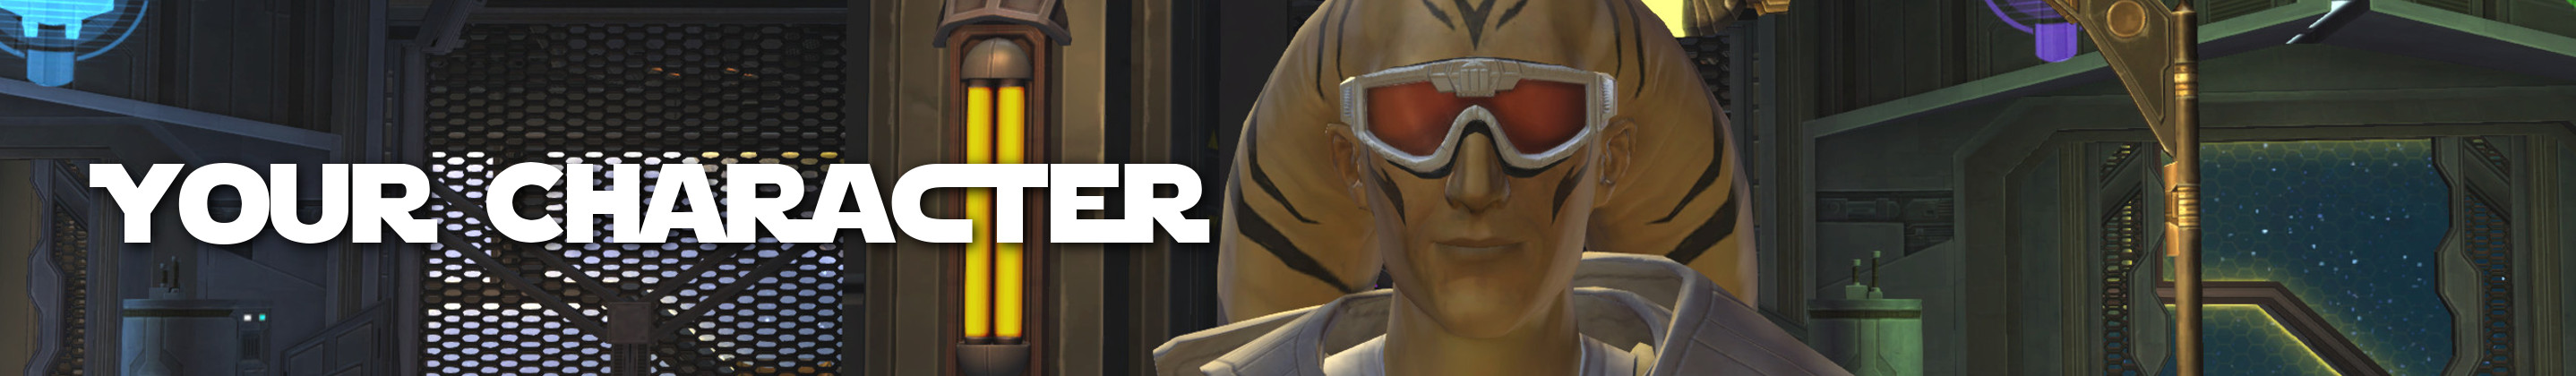 Developing Your Own Character in SWTOR